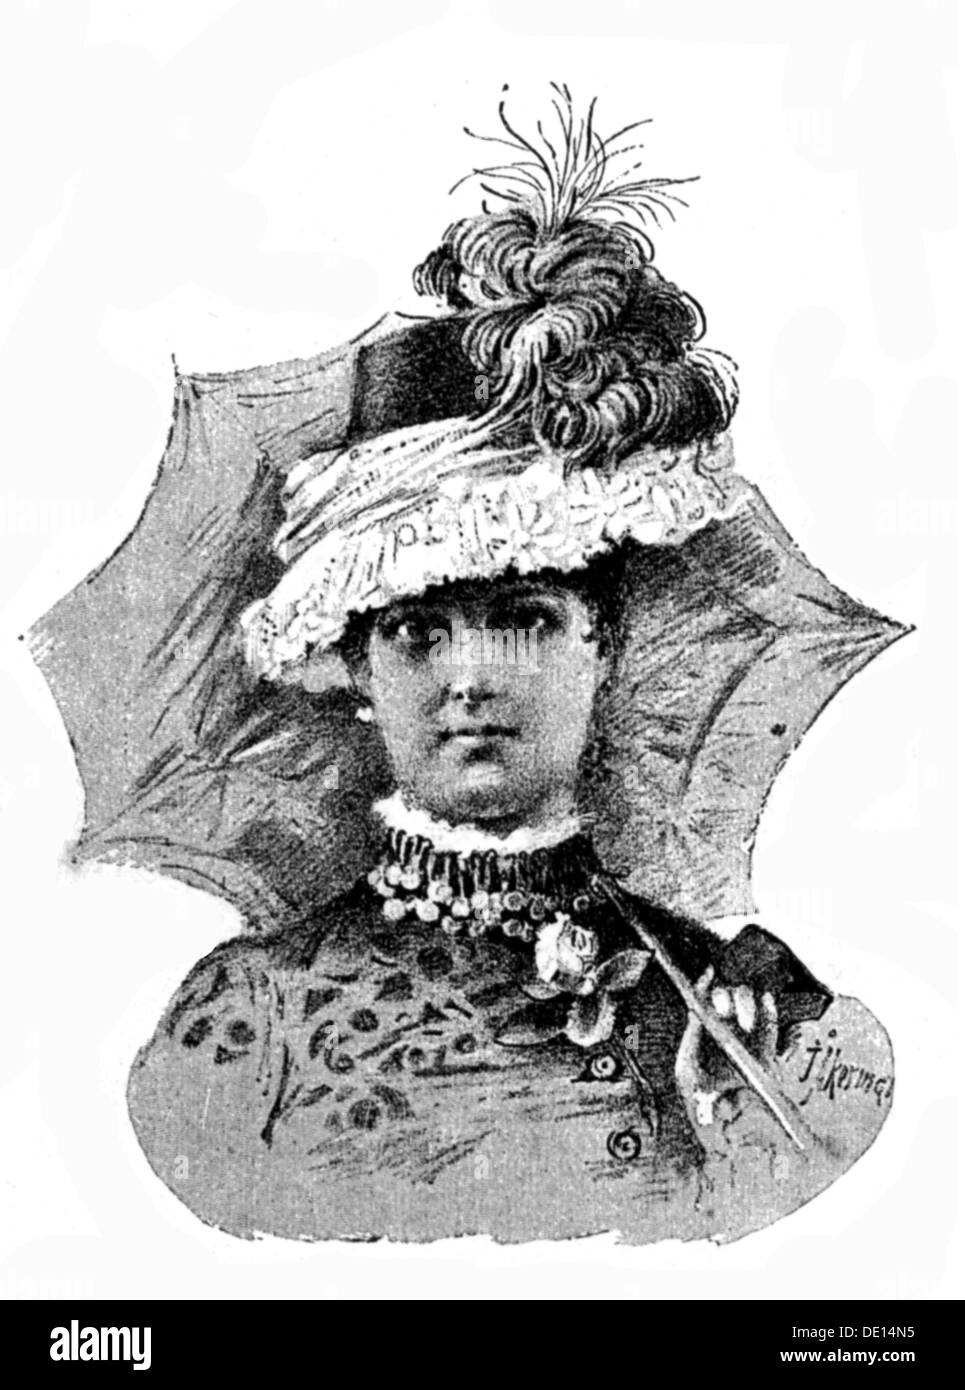 fashion, 19th century, hat with gold lace, New York, wood engraving, 1883, Additional-Rights-Clearences-Not Available Stock Photo